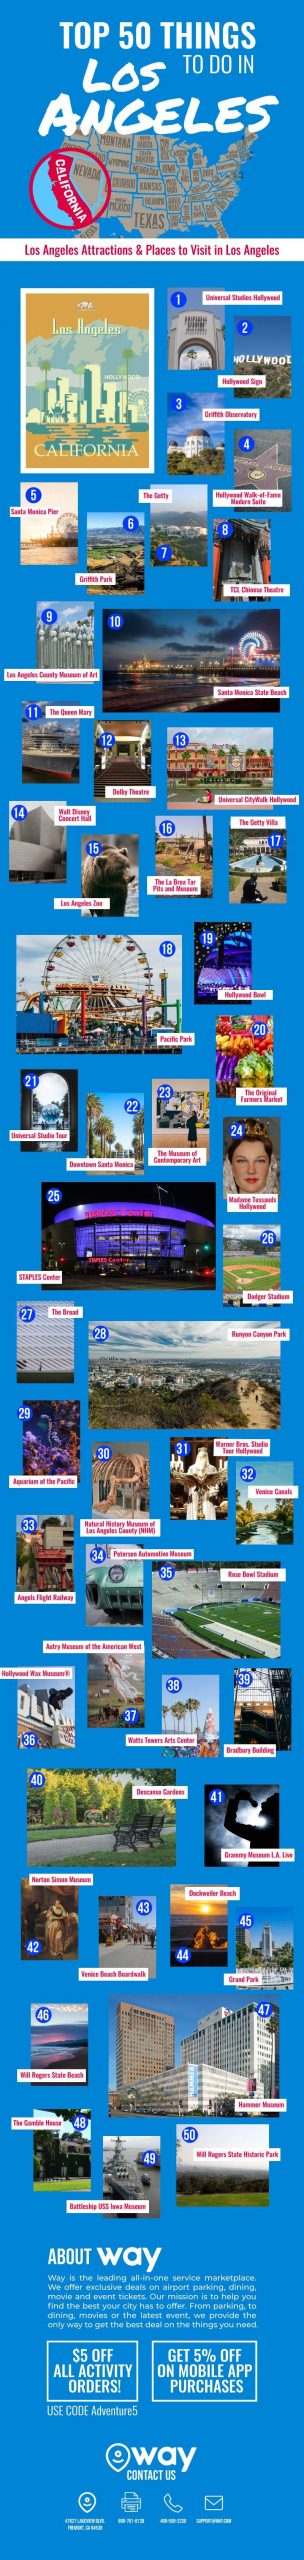 Top 50 Things to Do in Los Angeles